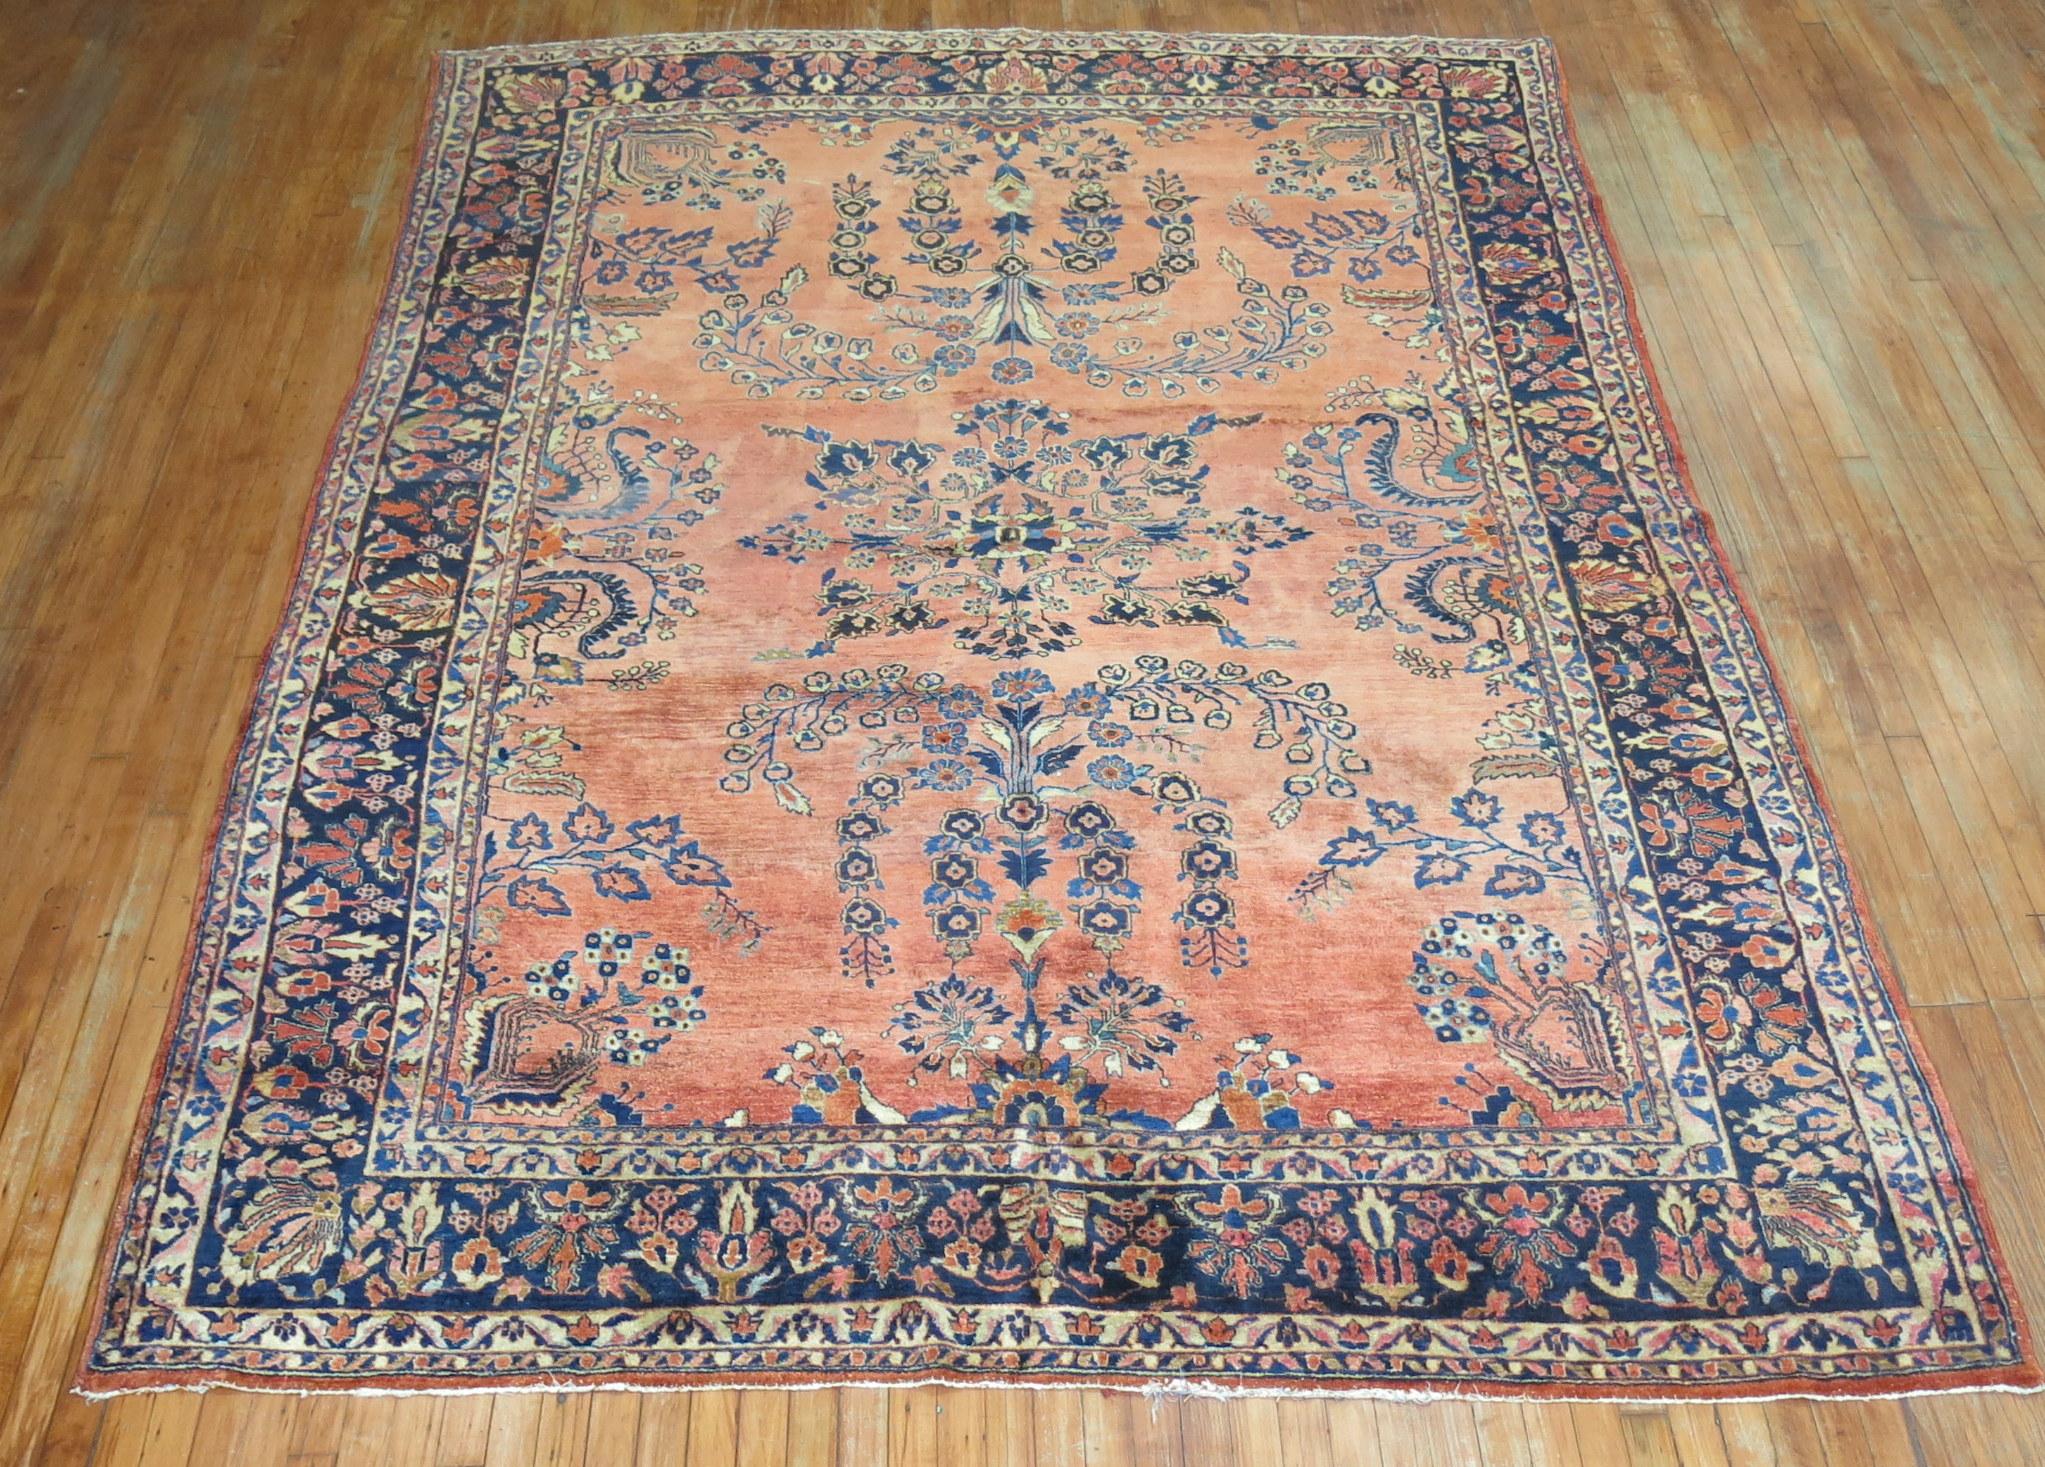 Stunning early 20th century Persian Sarouk Mohajeran Rug.

Before the 1920s the Sarouk design was the most popular of Persian rugs worldwide. Most of them consist of deep red fields with navy borders. Rarely are they found in inverse colors like